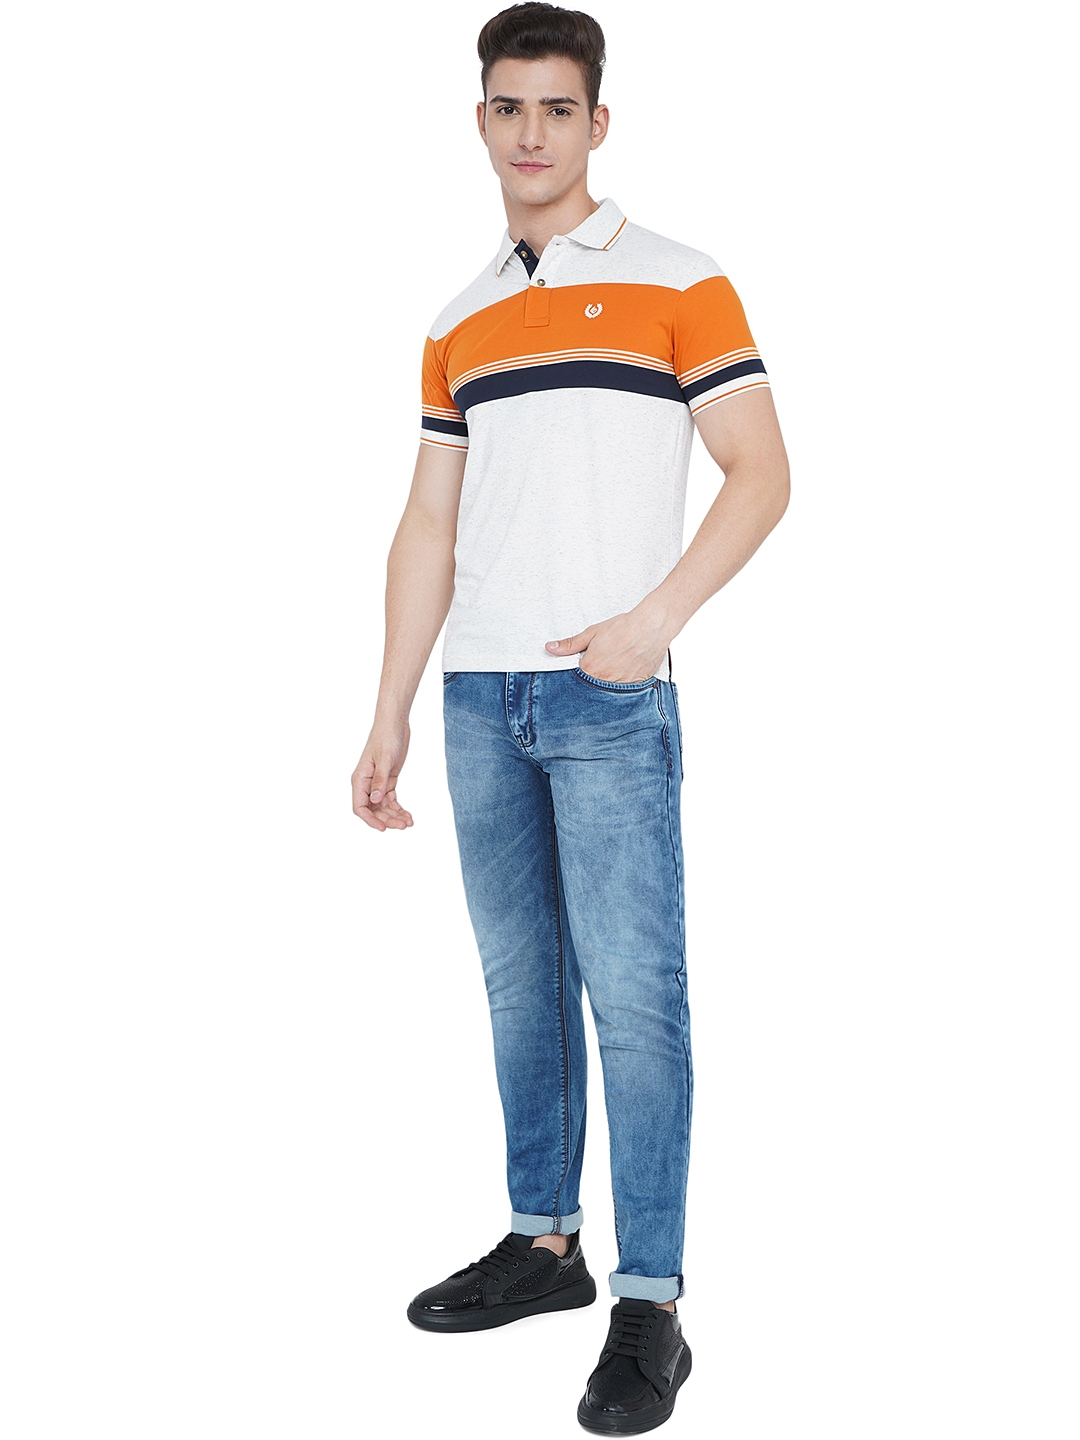 Greenfibre | White Striped Slim Fit Polo T-Shirt | Greenfibre 3